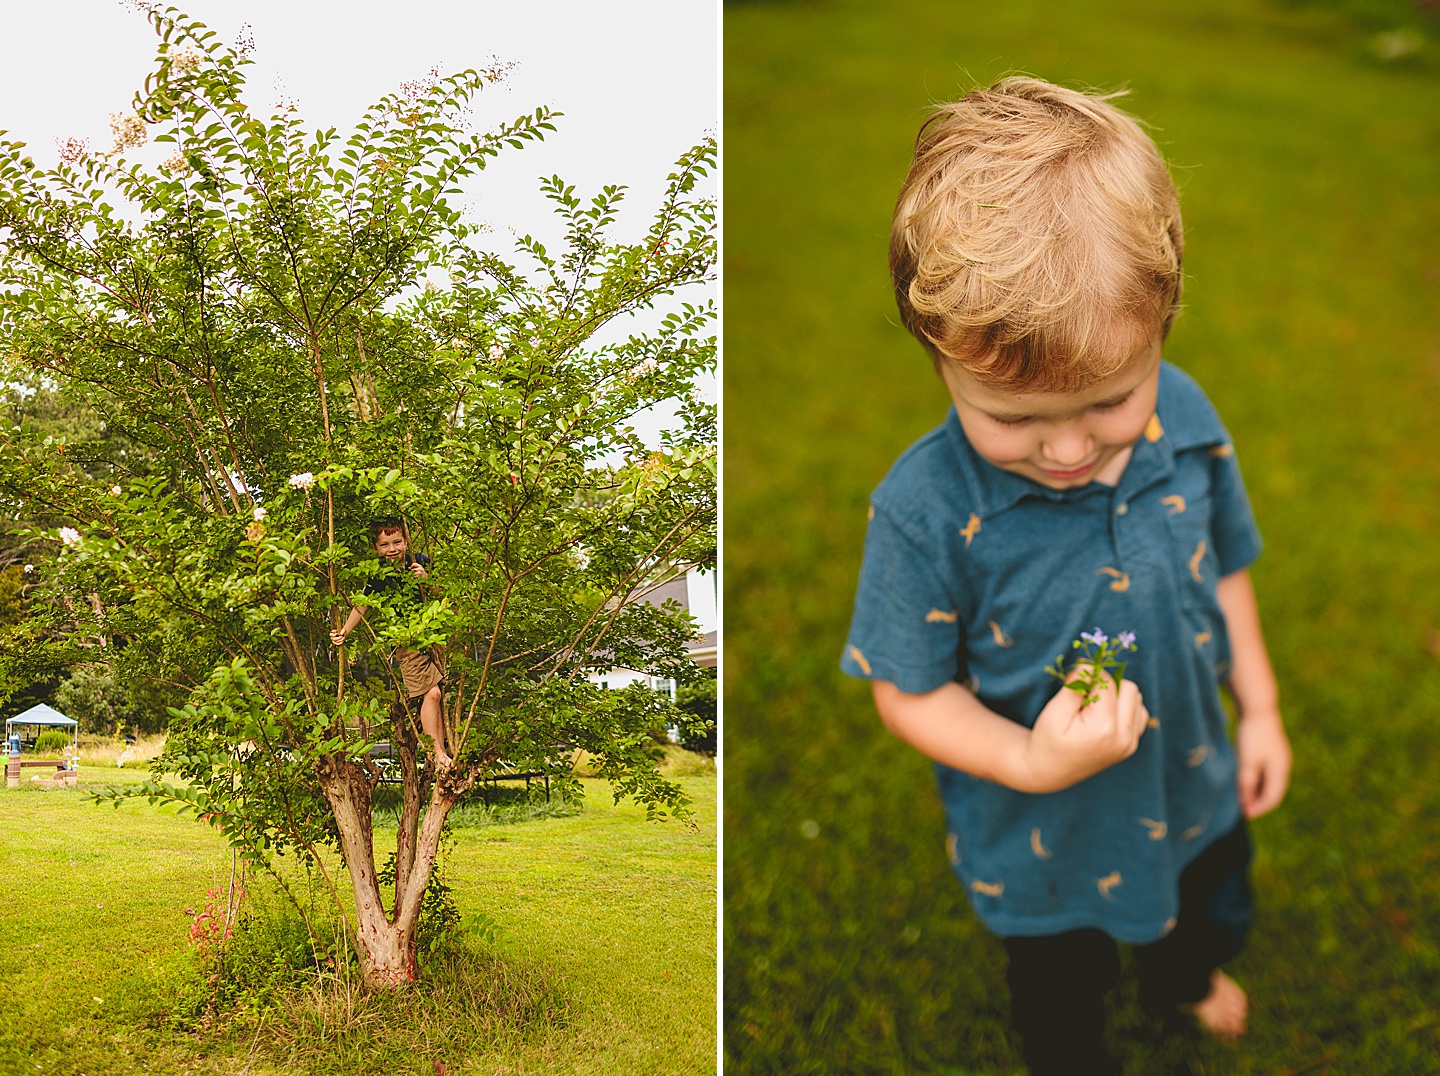 Kid climbing up tree and a child holding flowers